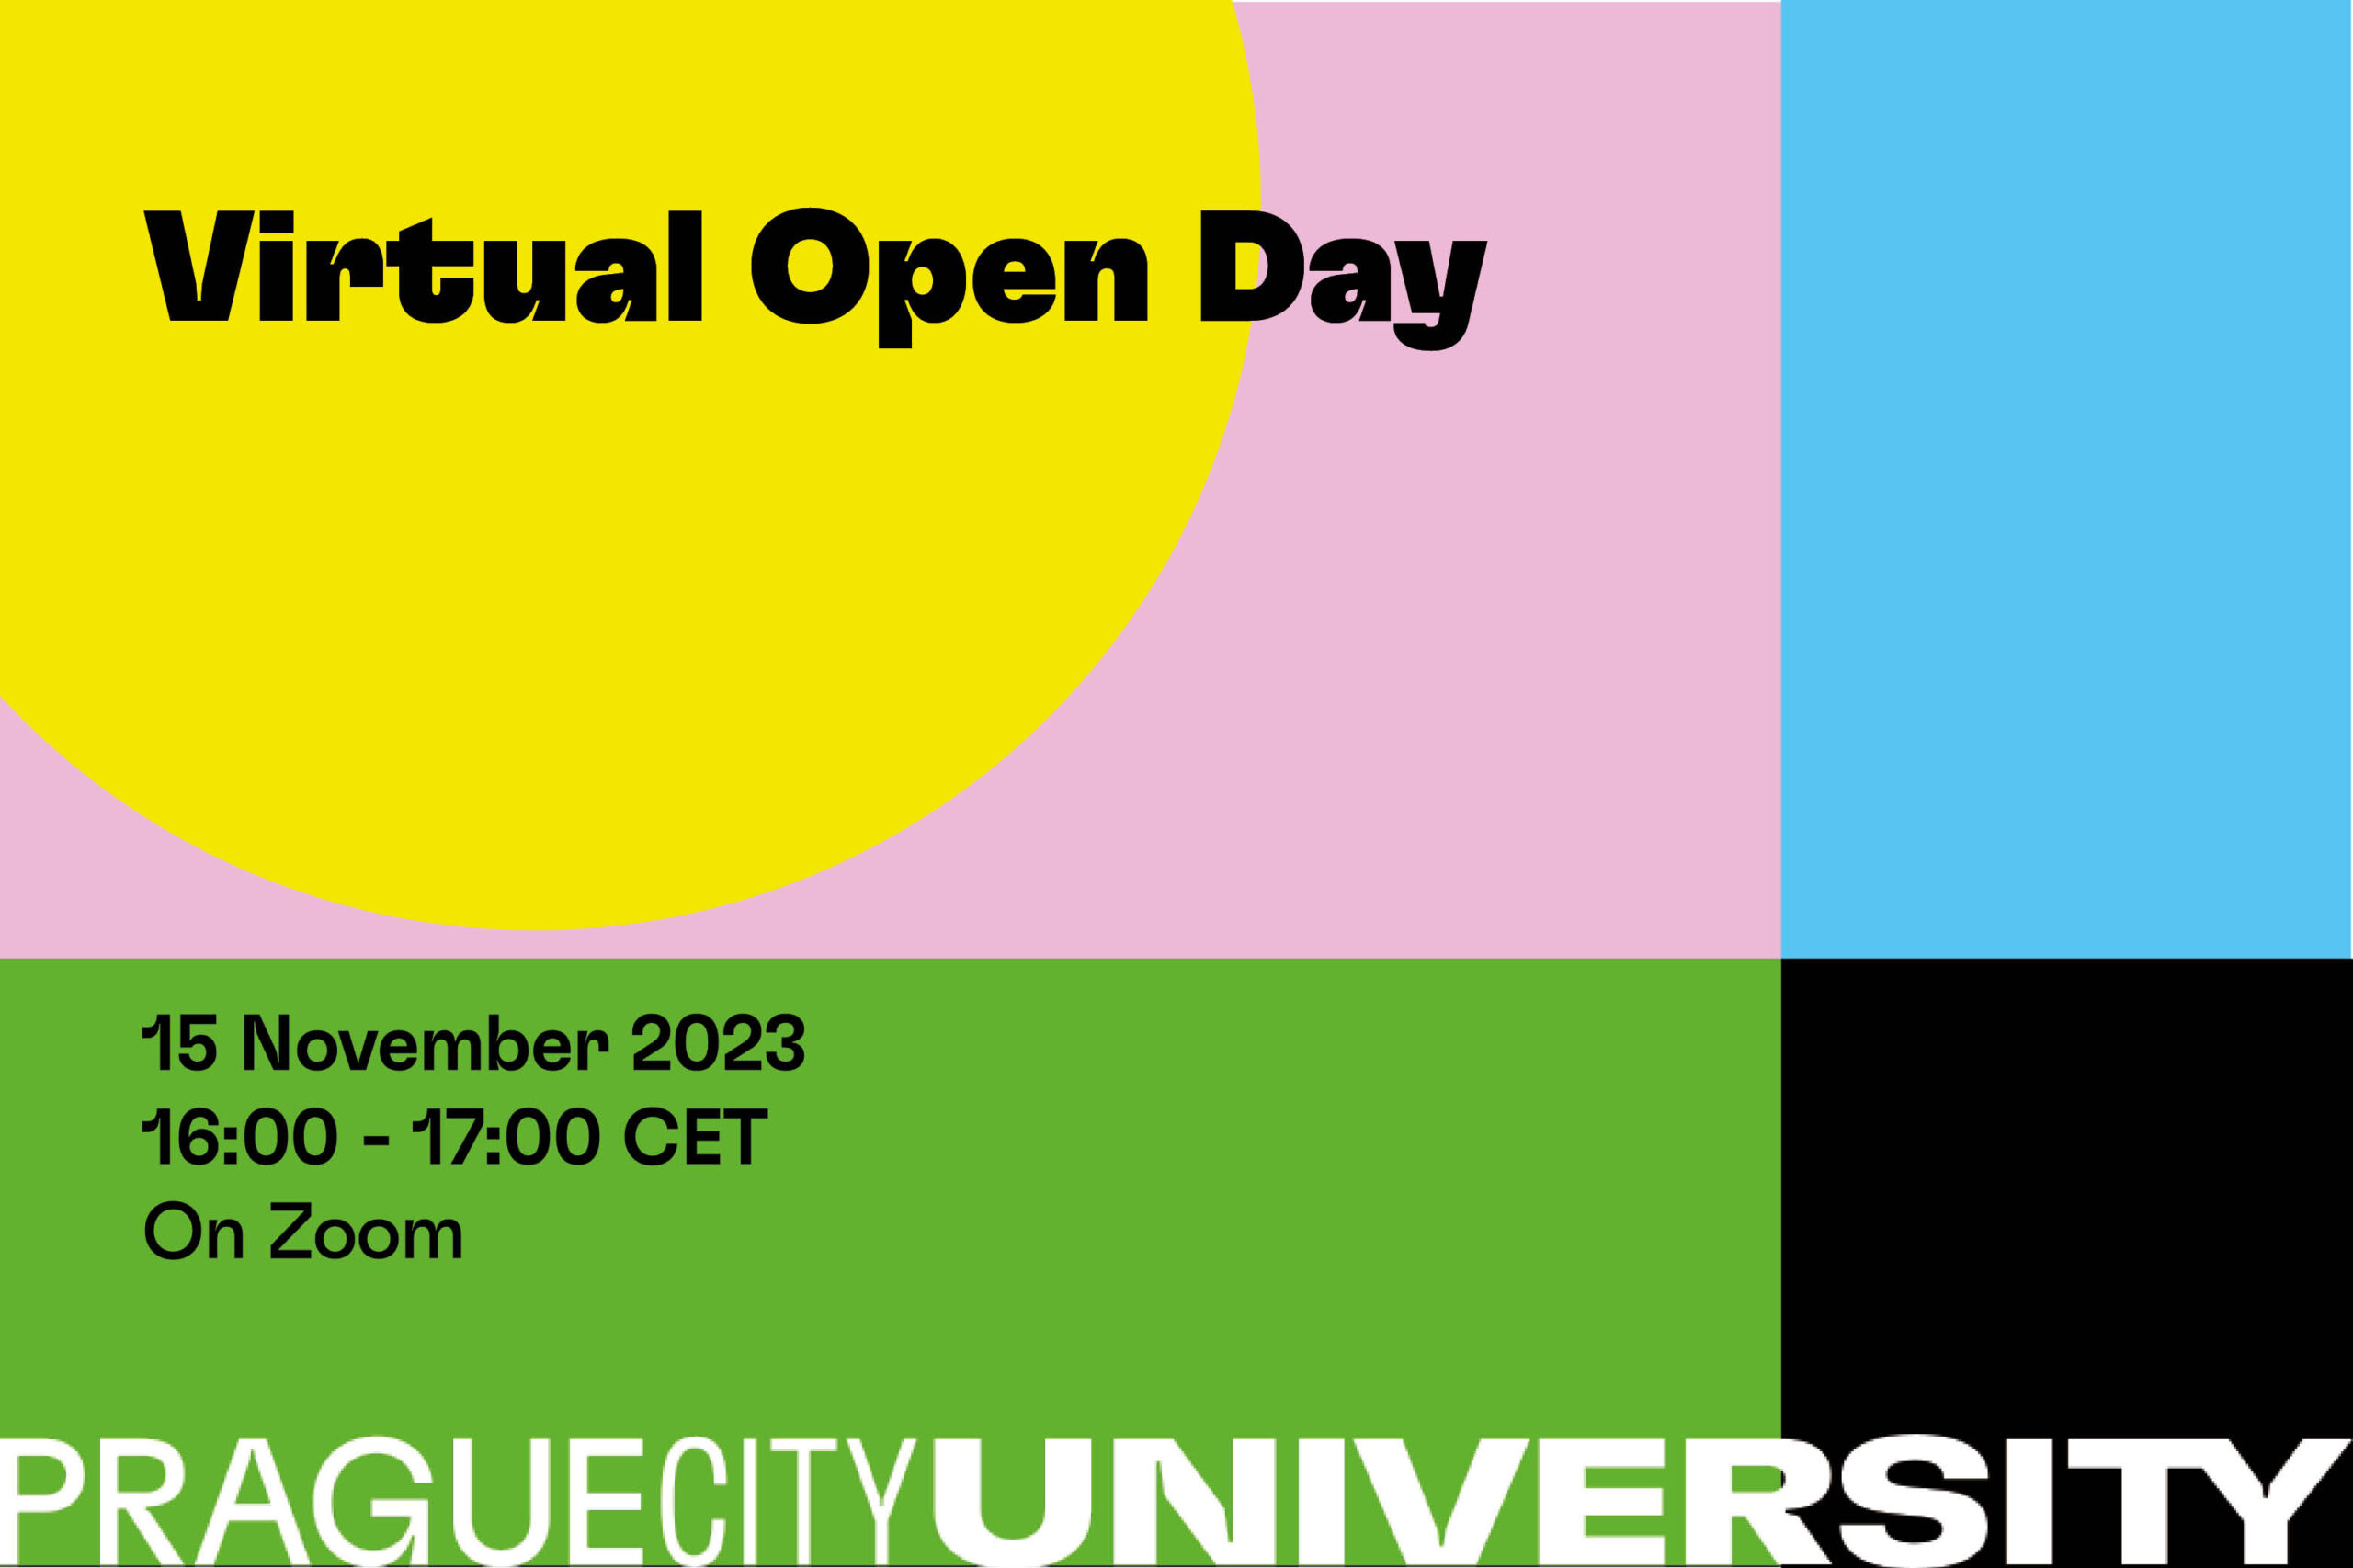 Virtual Open Day, 15 November 2023, 16:00 - 17:00 CET on Zoom